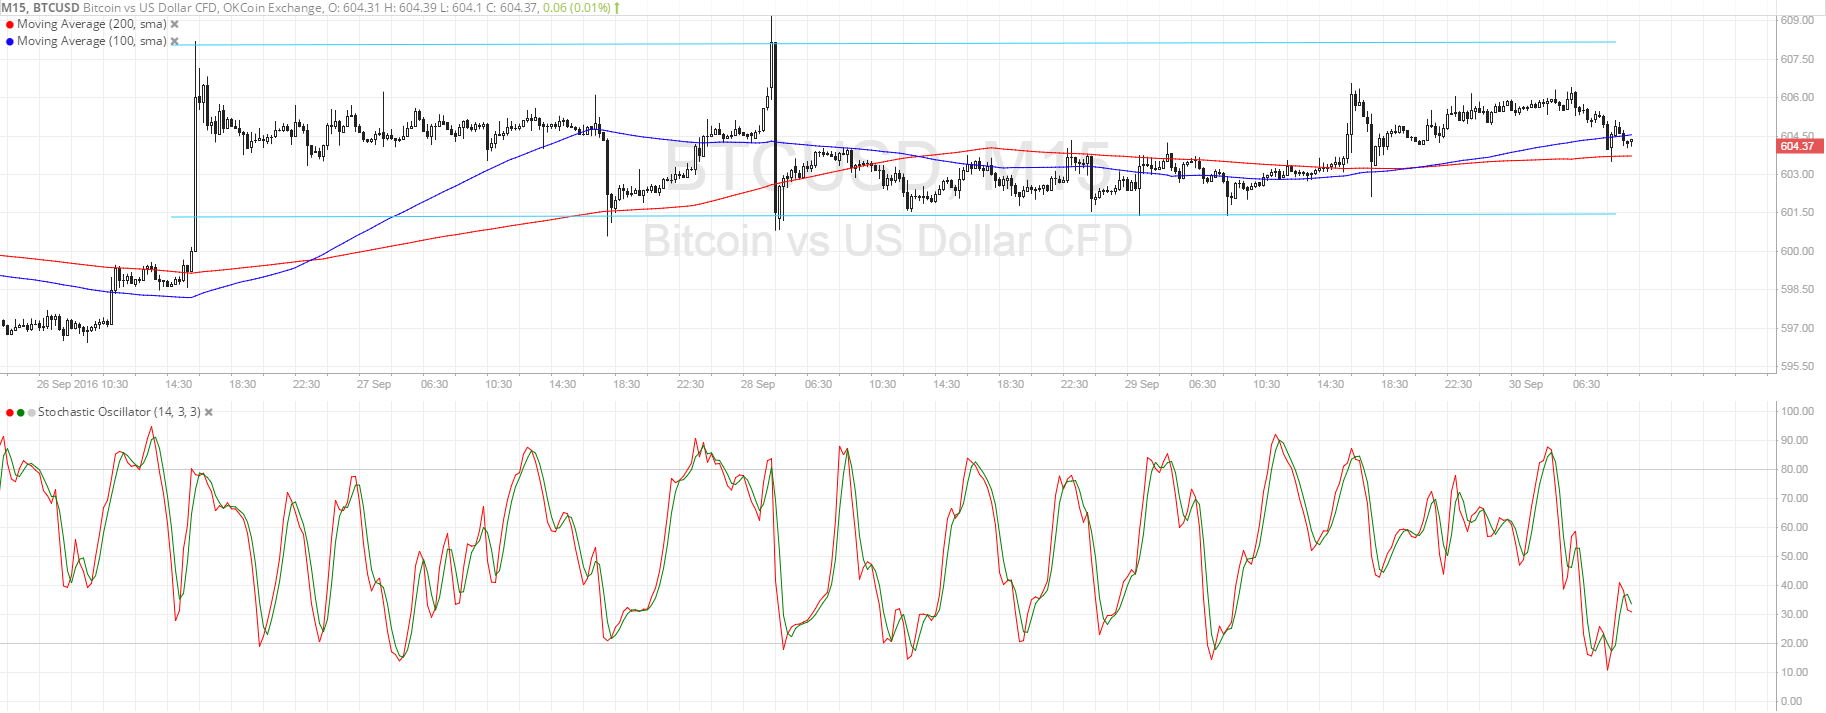 Bitcoin Price Technical Analysis for 09/30/2016 - Another Test of Range Support?